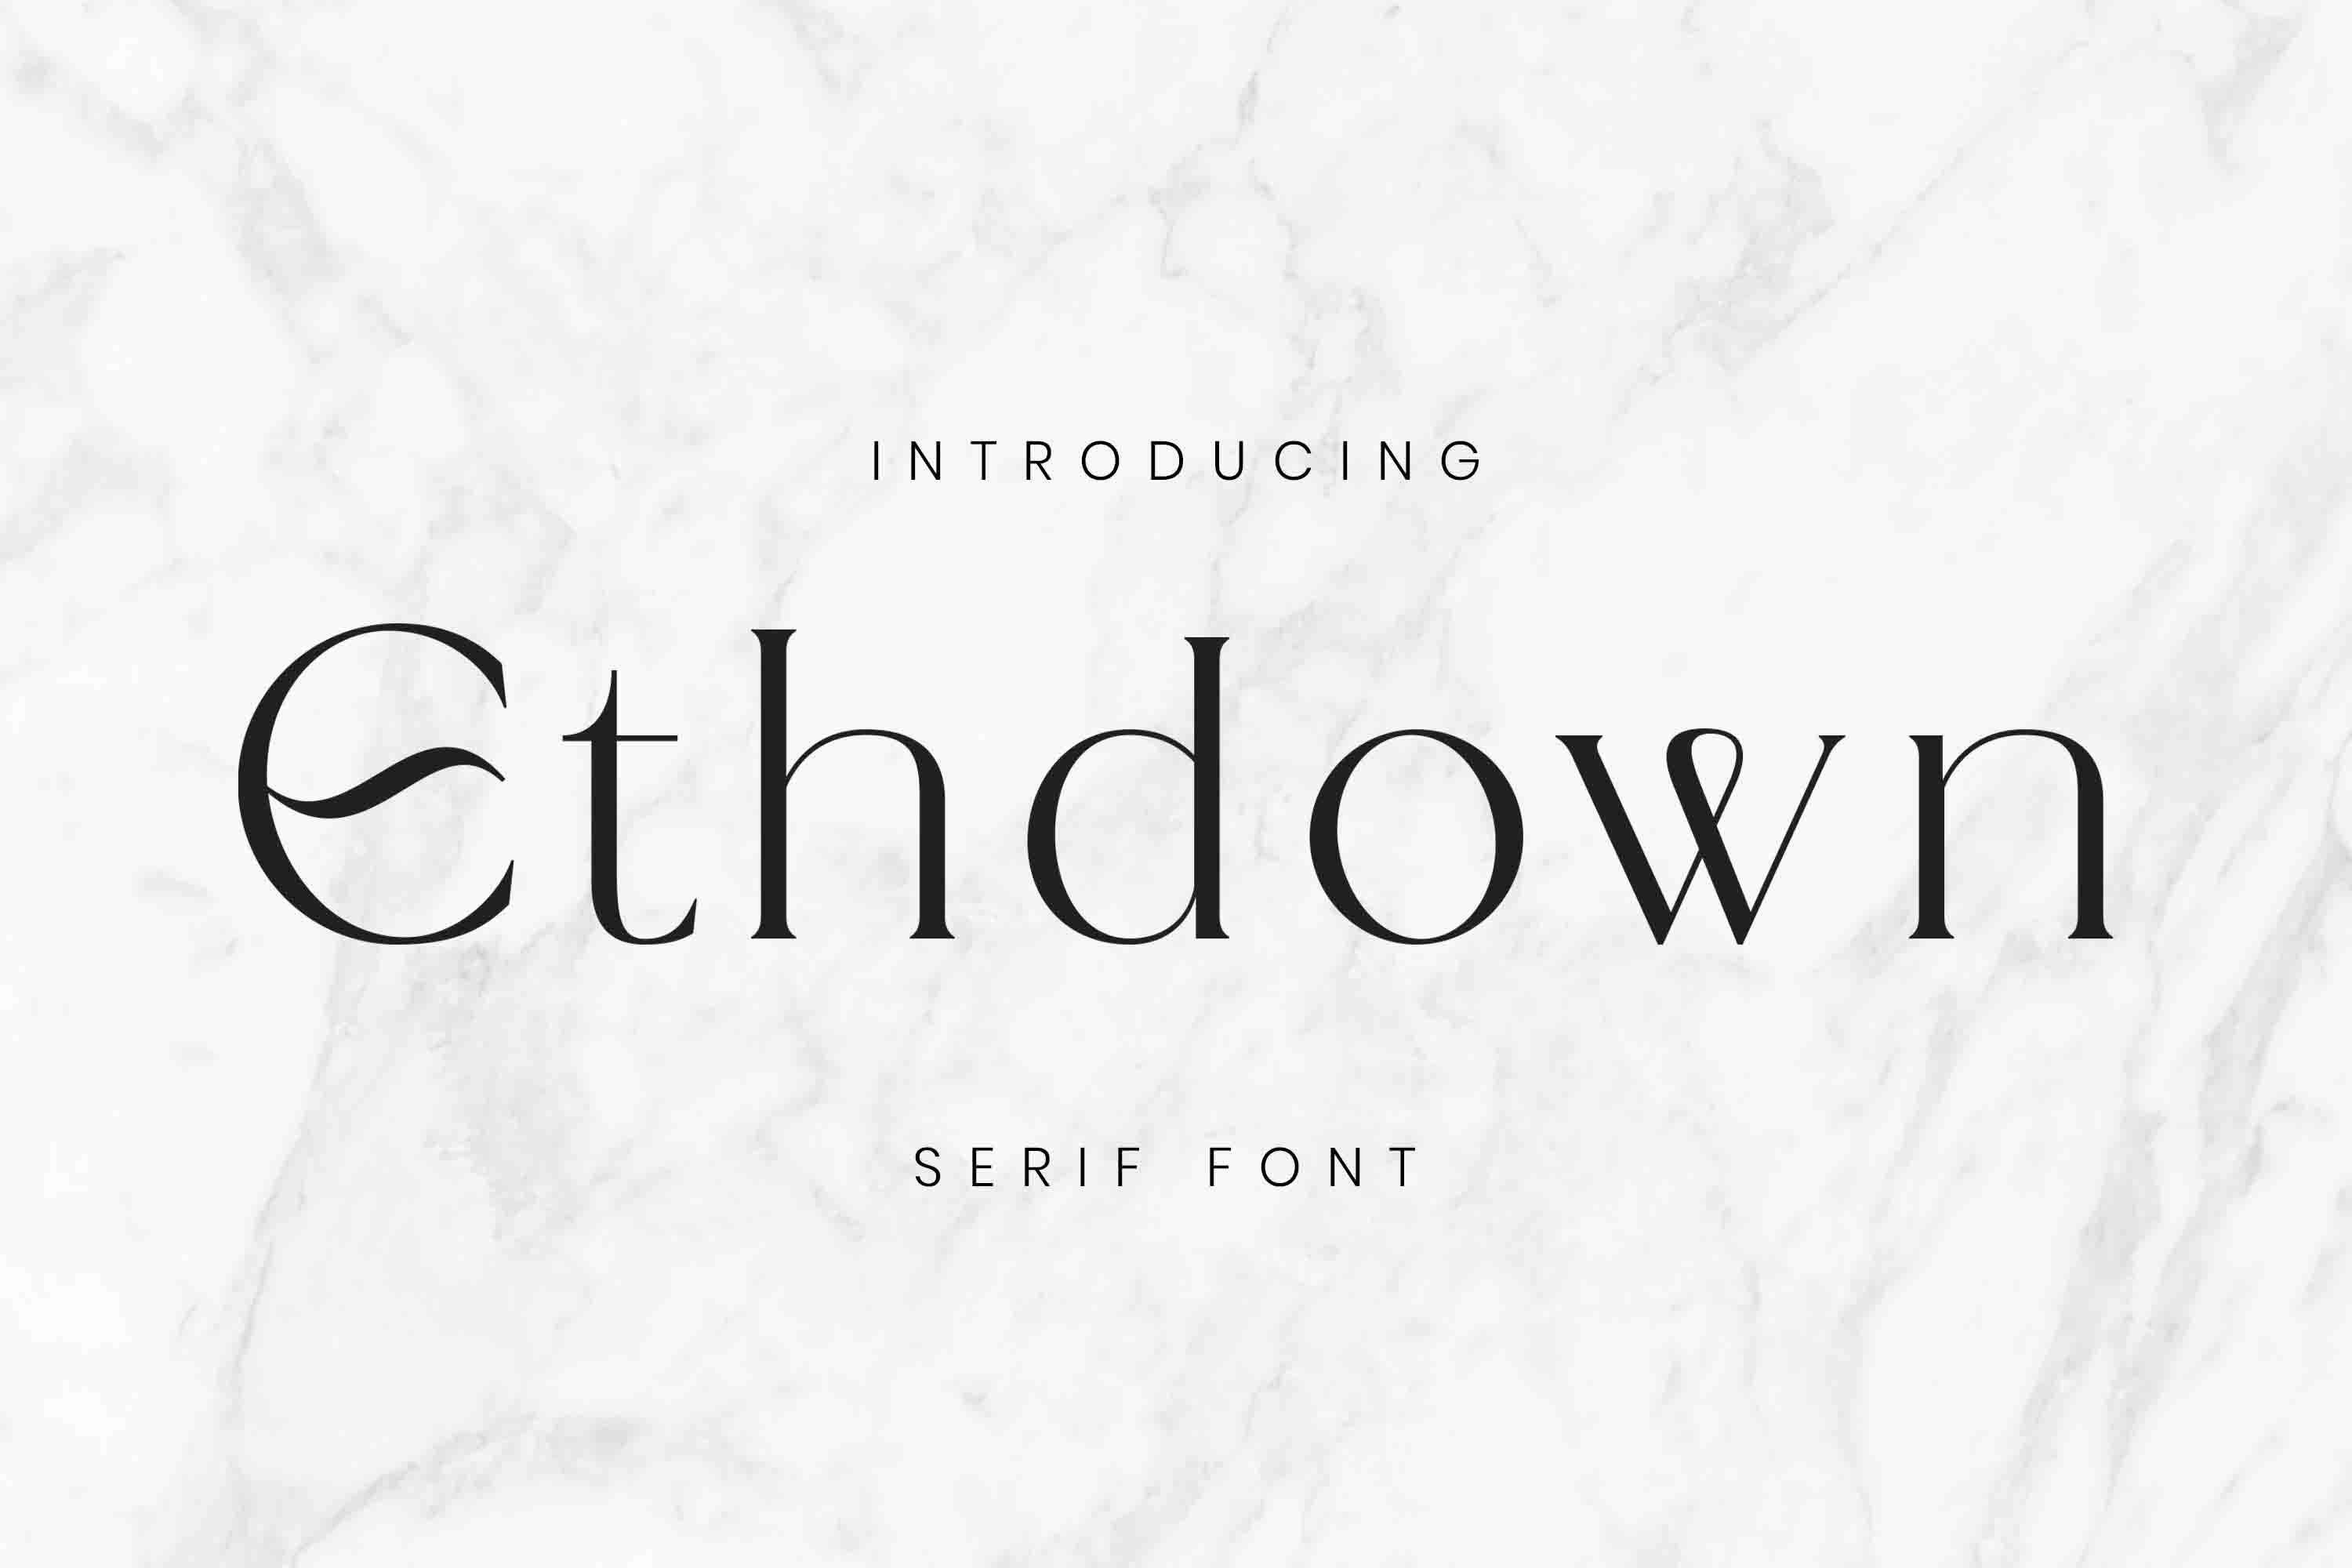 Ethdown cover image.